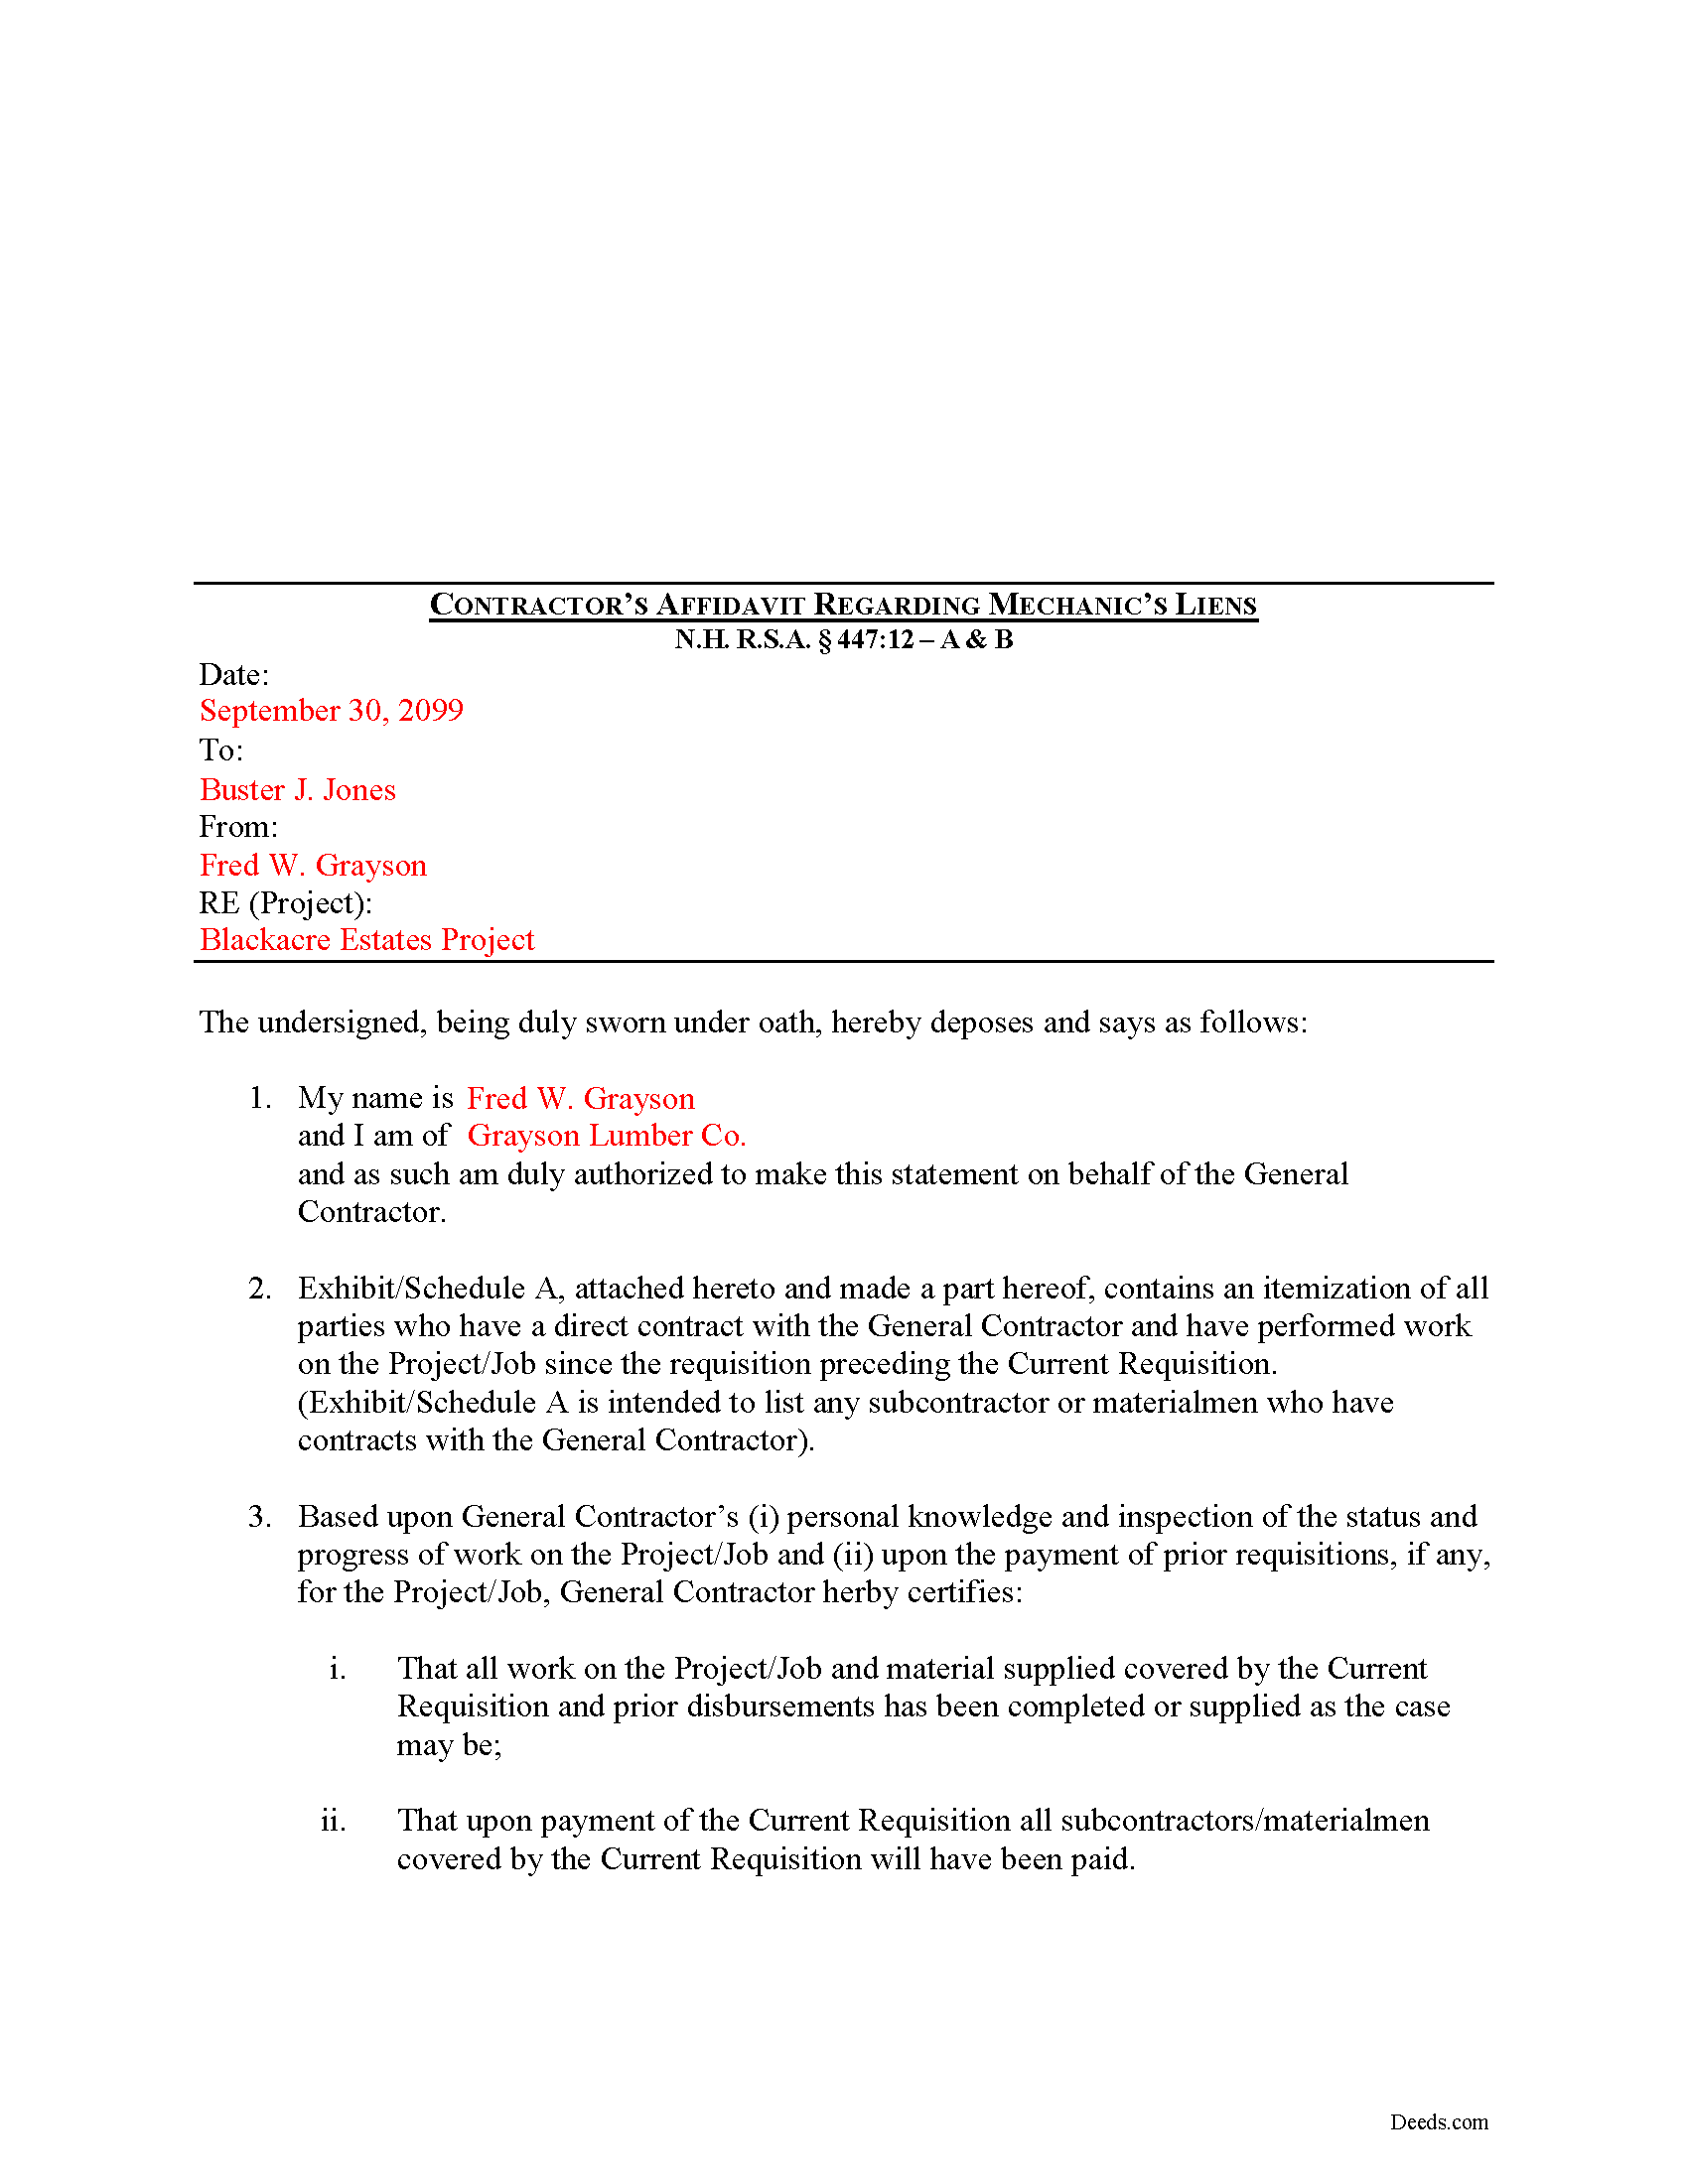 Completed Example of the Contractor Affidavit Document